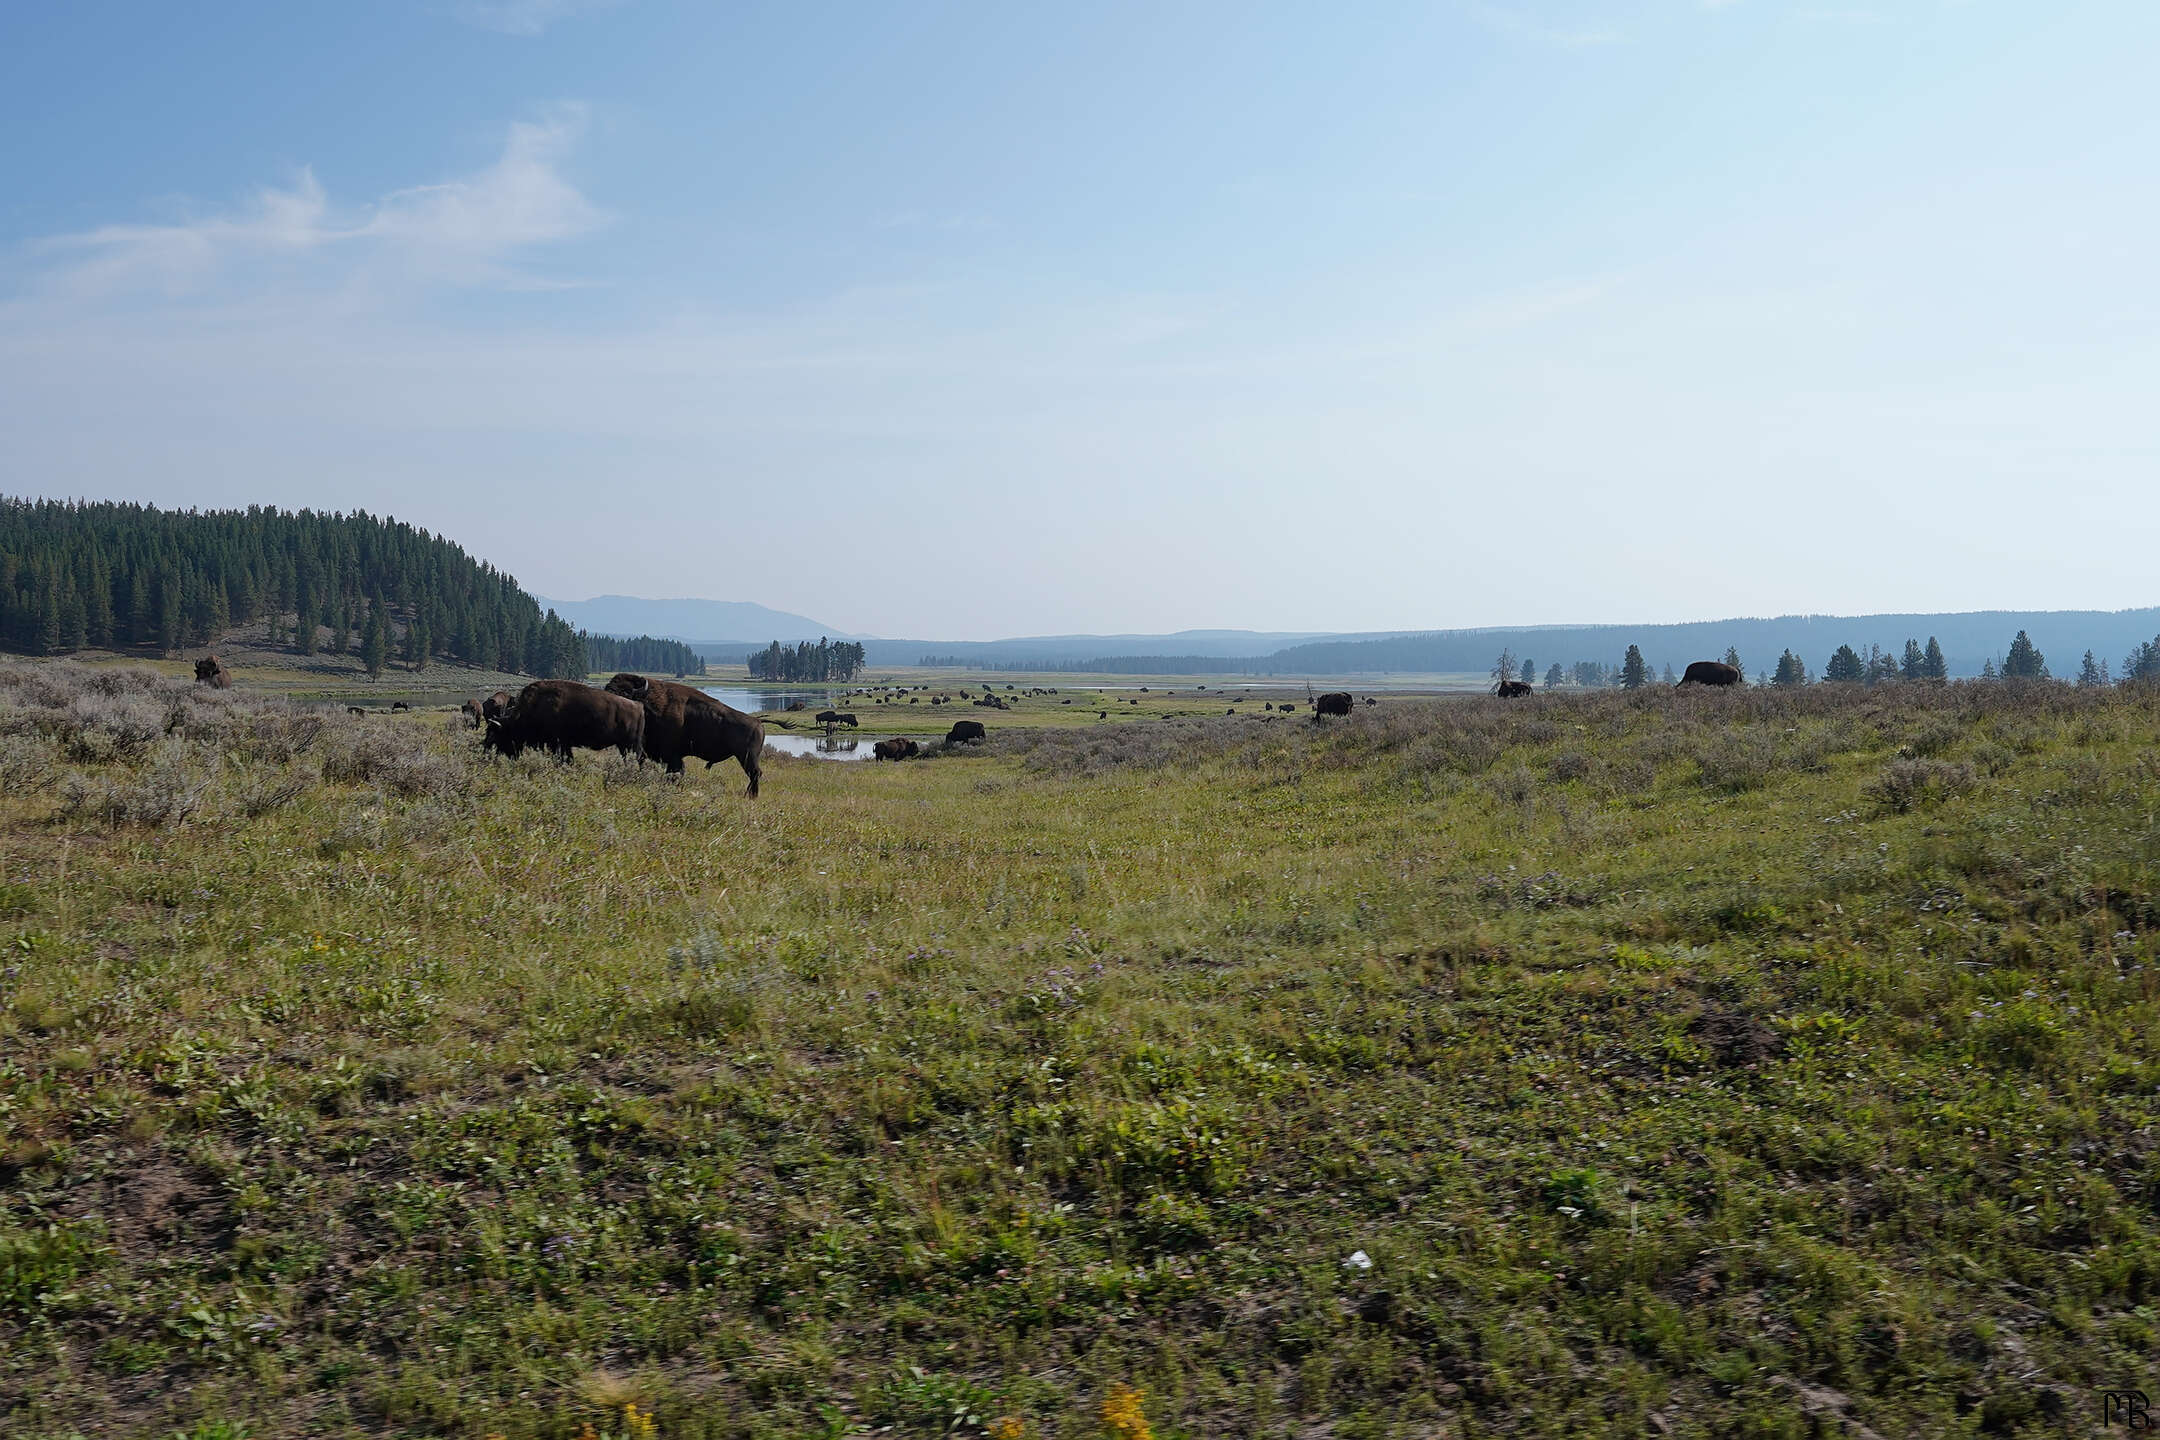 Bison gathered near the road